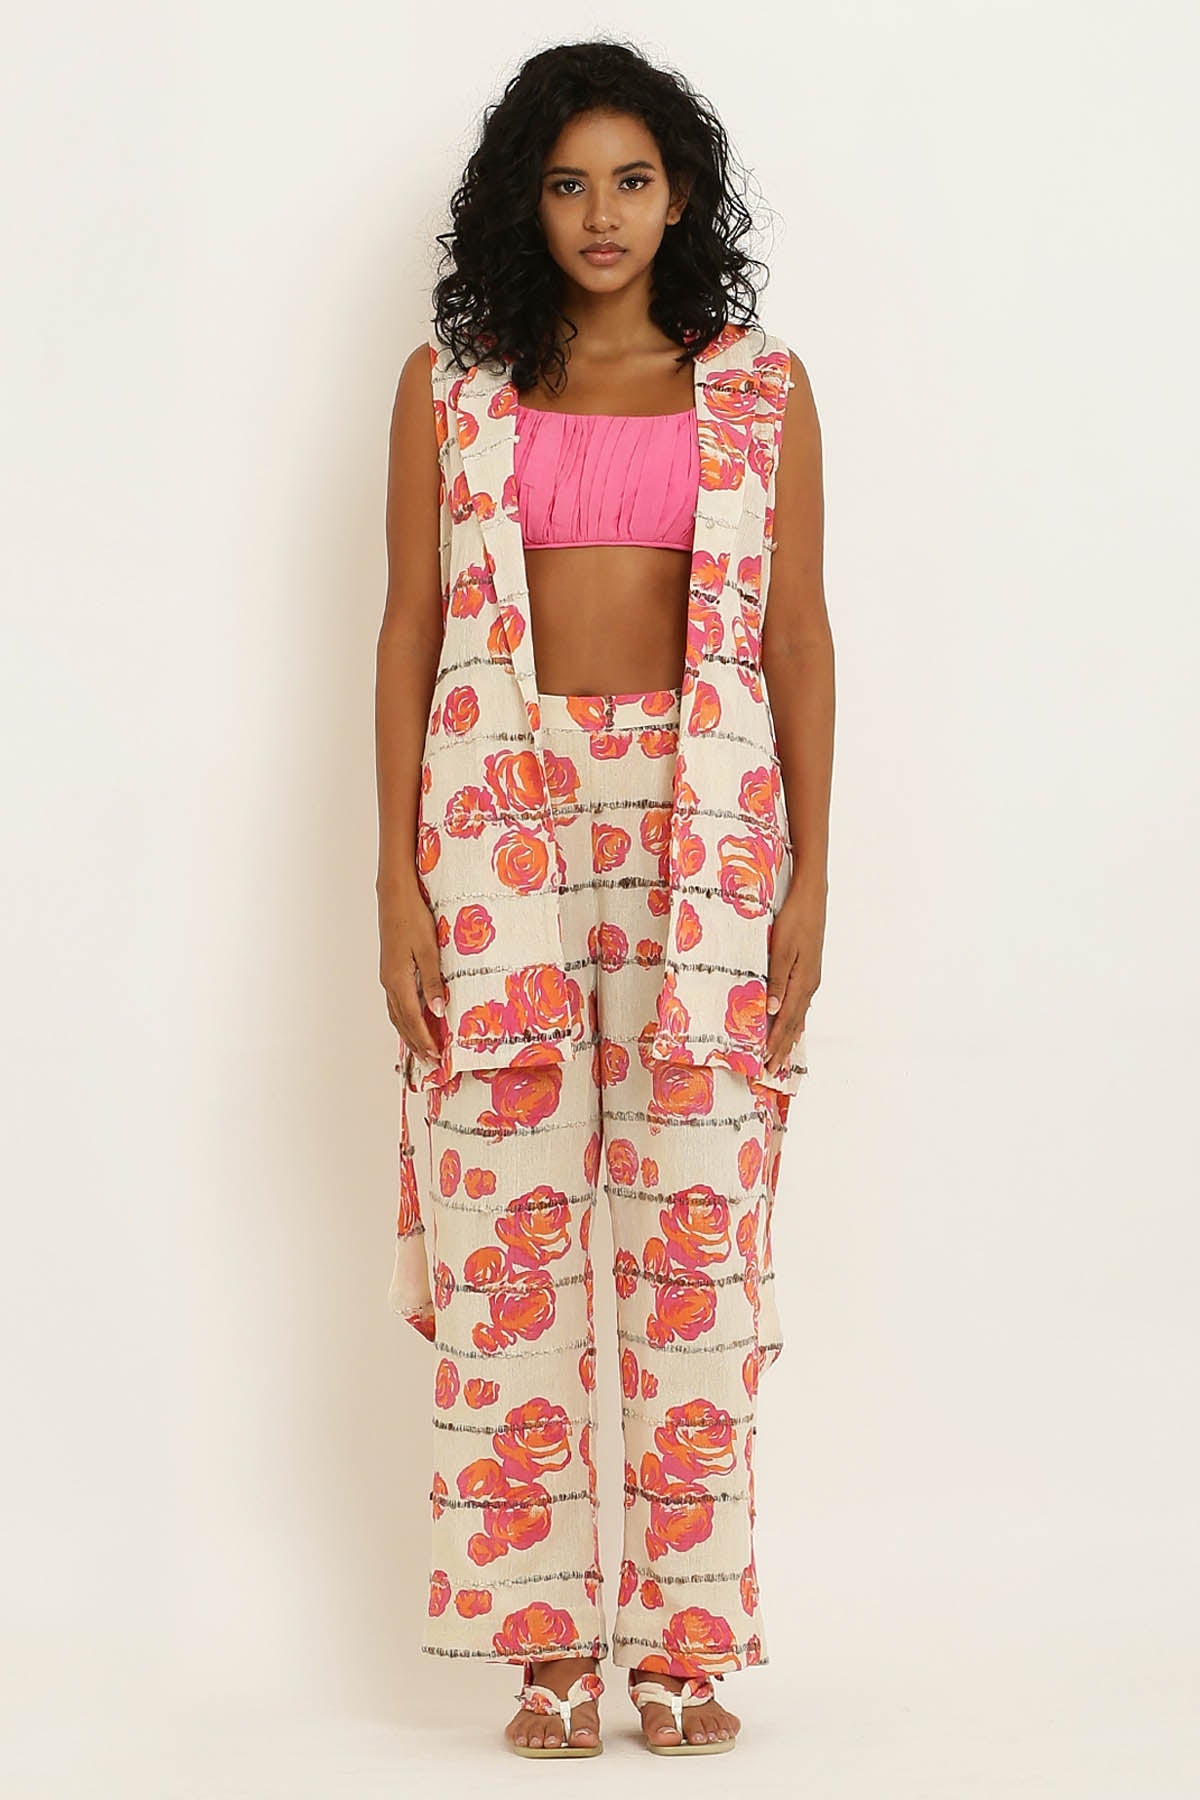 Designer Kusmi Handwoven Pink Rose Print Pants - Comfort & Style in Every Step For Women at ScrollnShops